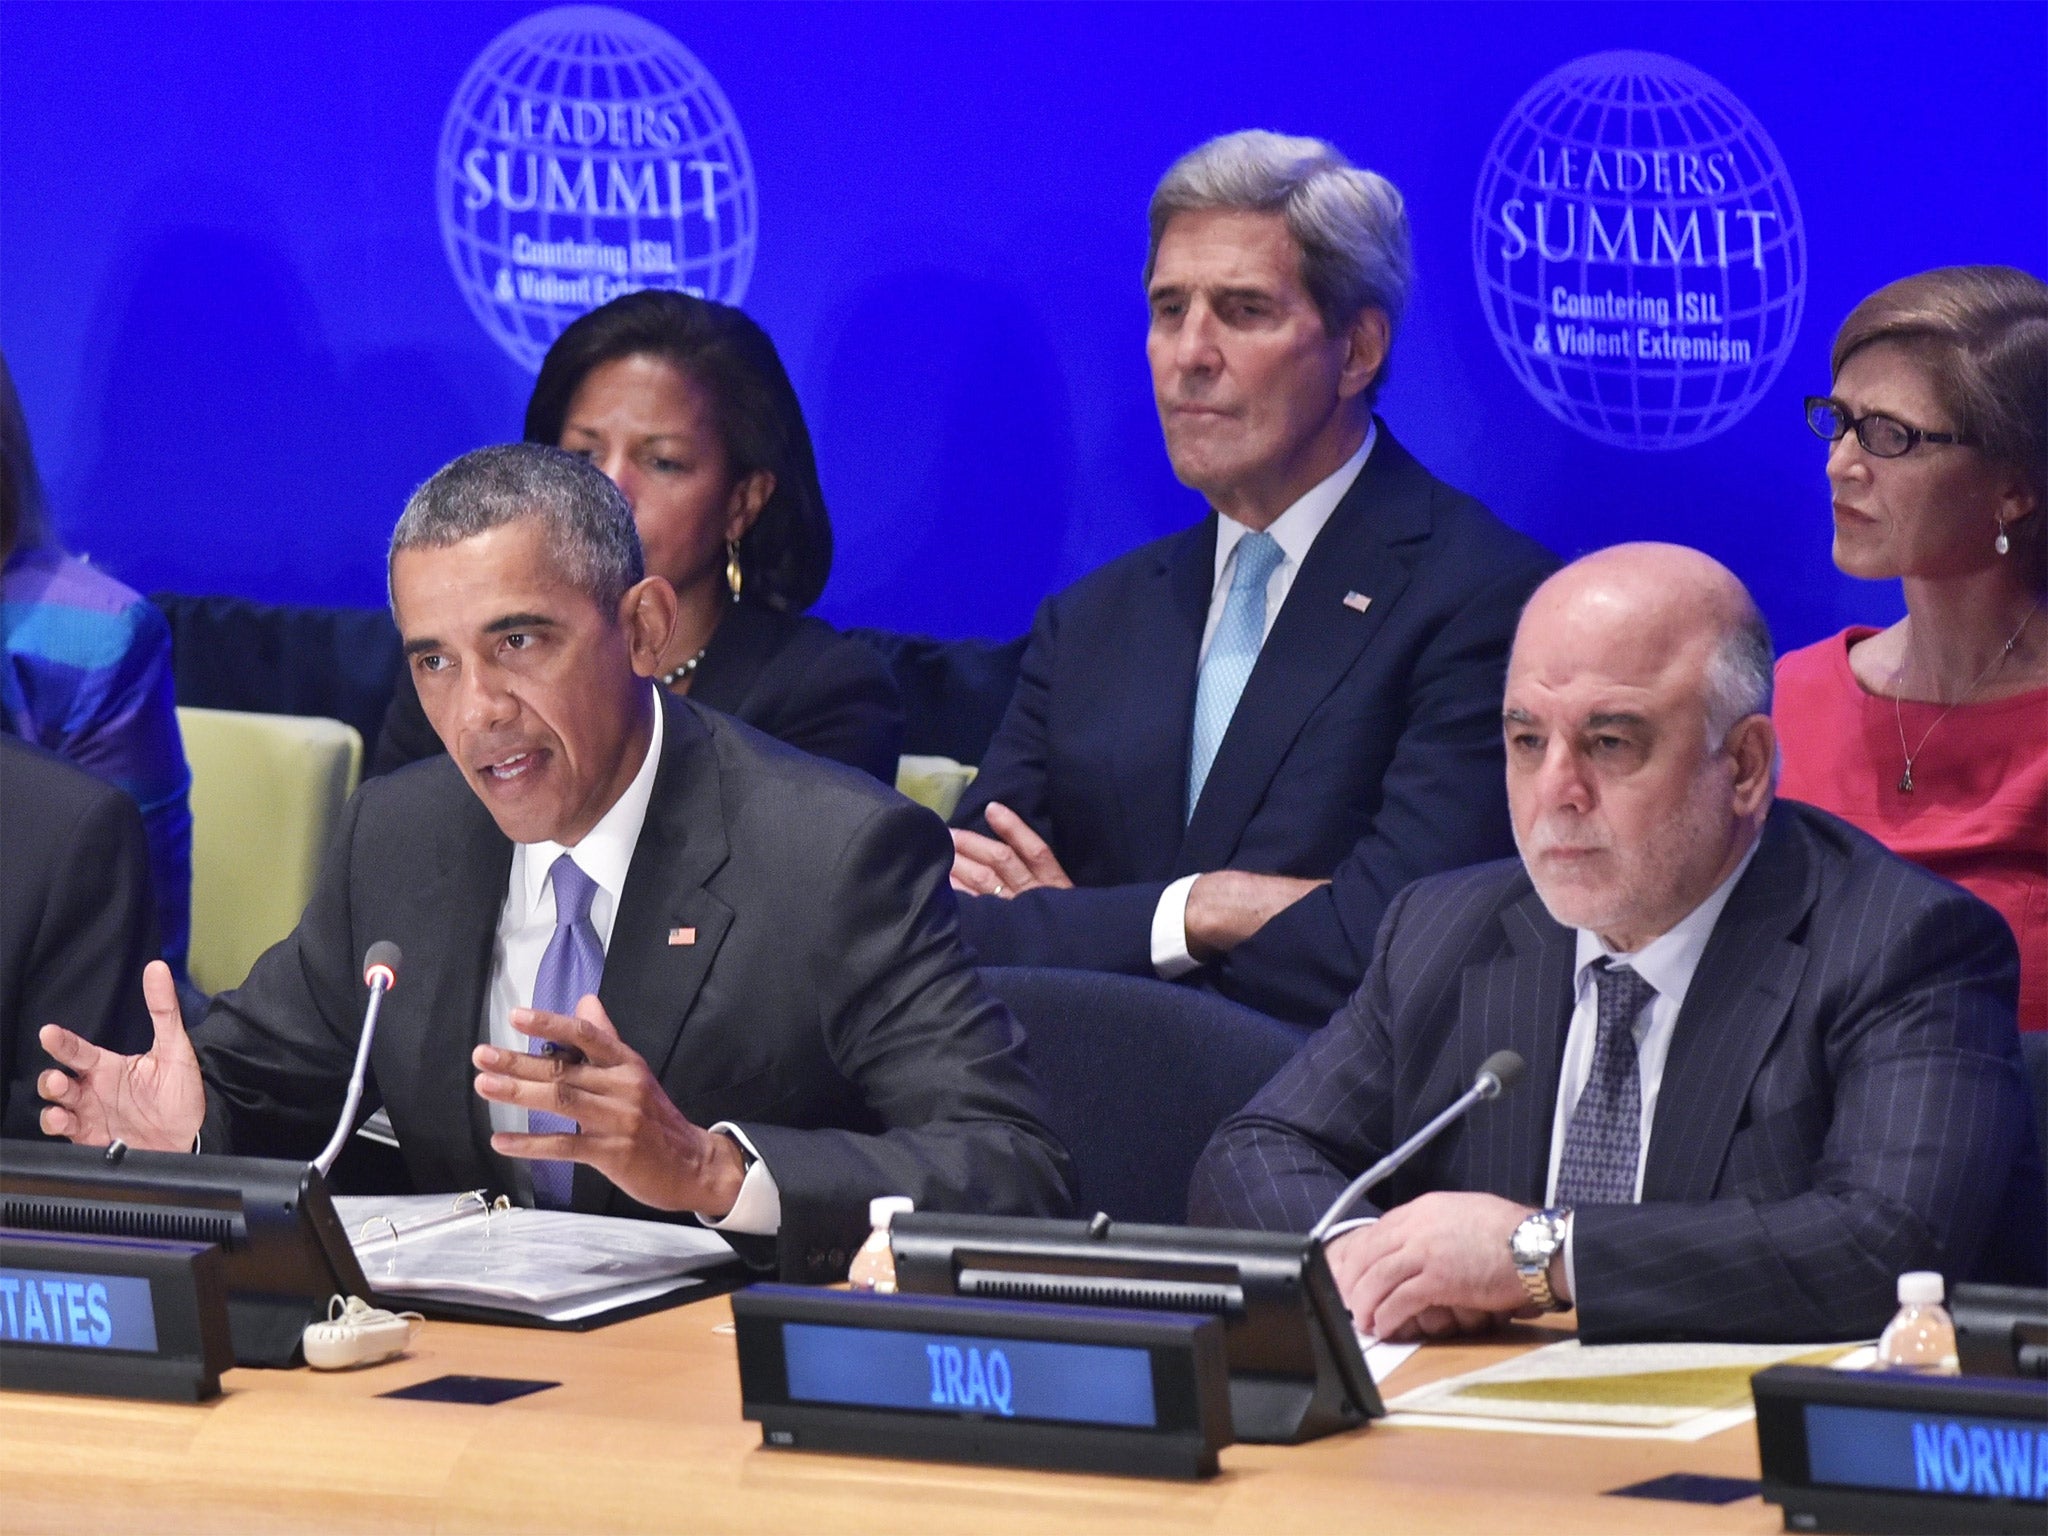 Barack Obama and Iraqi Prime Minister Haider al-Abadi at the Leaders’ Summit on Countering ISIL and Countering Violent Extremism at the UN headquarters